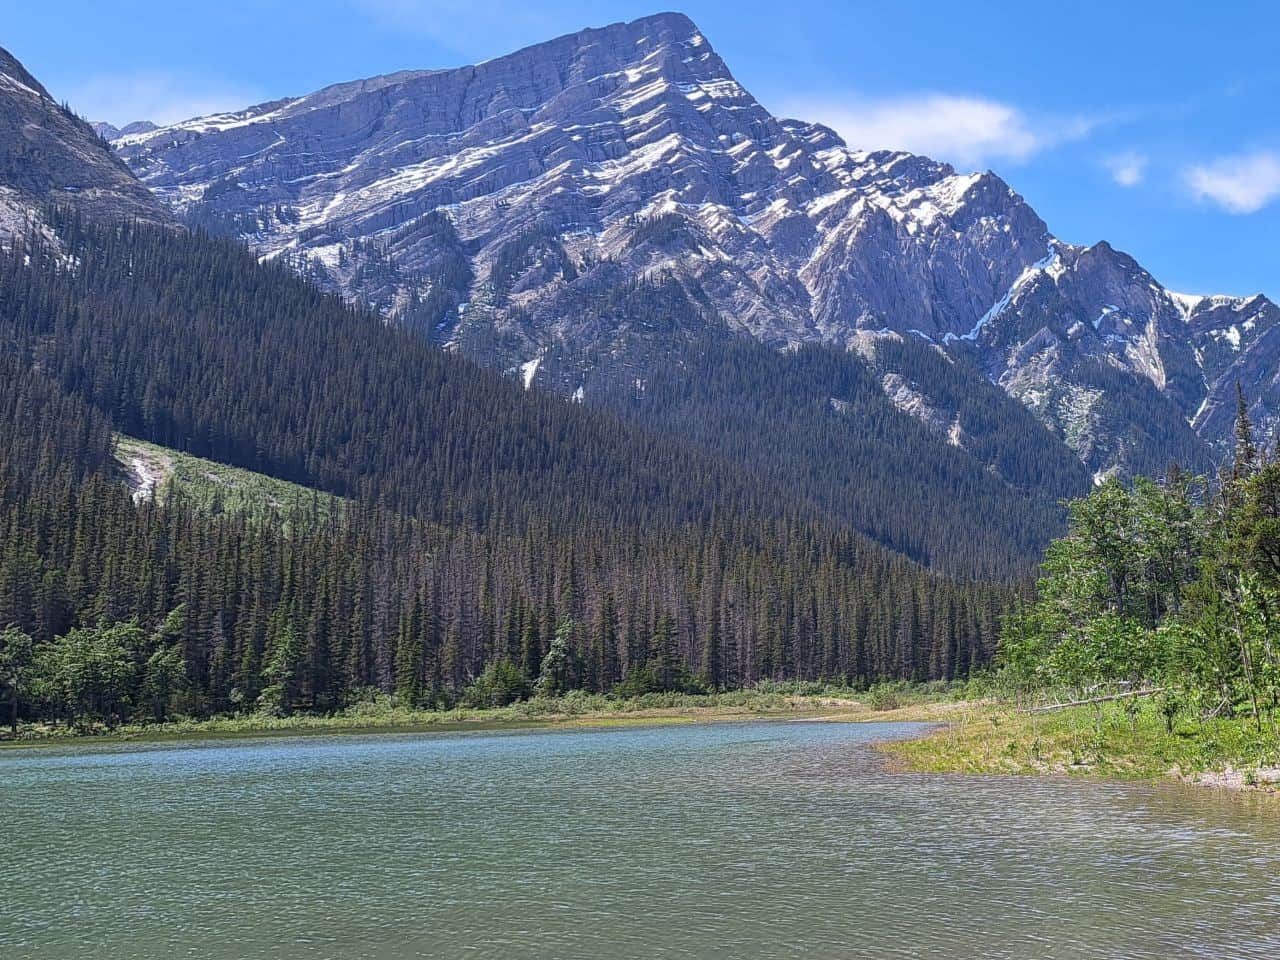 The Second Summit Lake is shallowed than the First Summit Lake in Jasper National Park